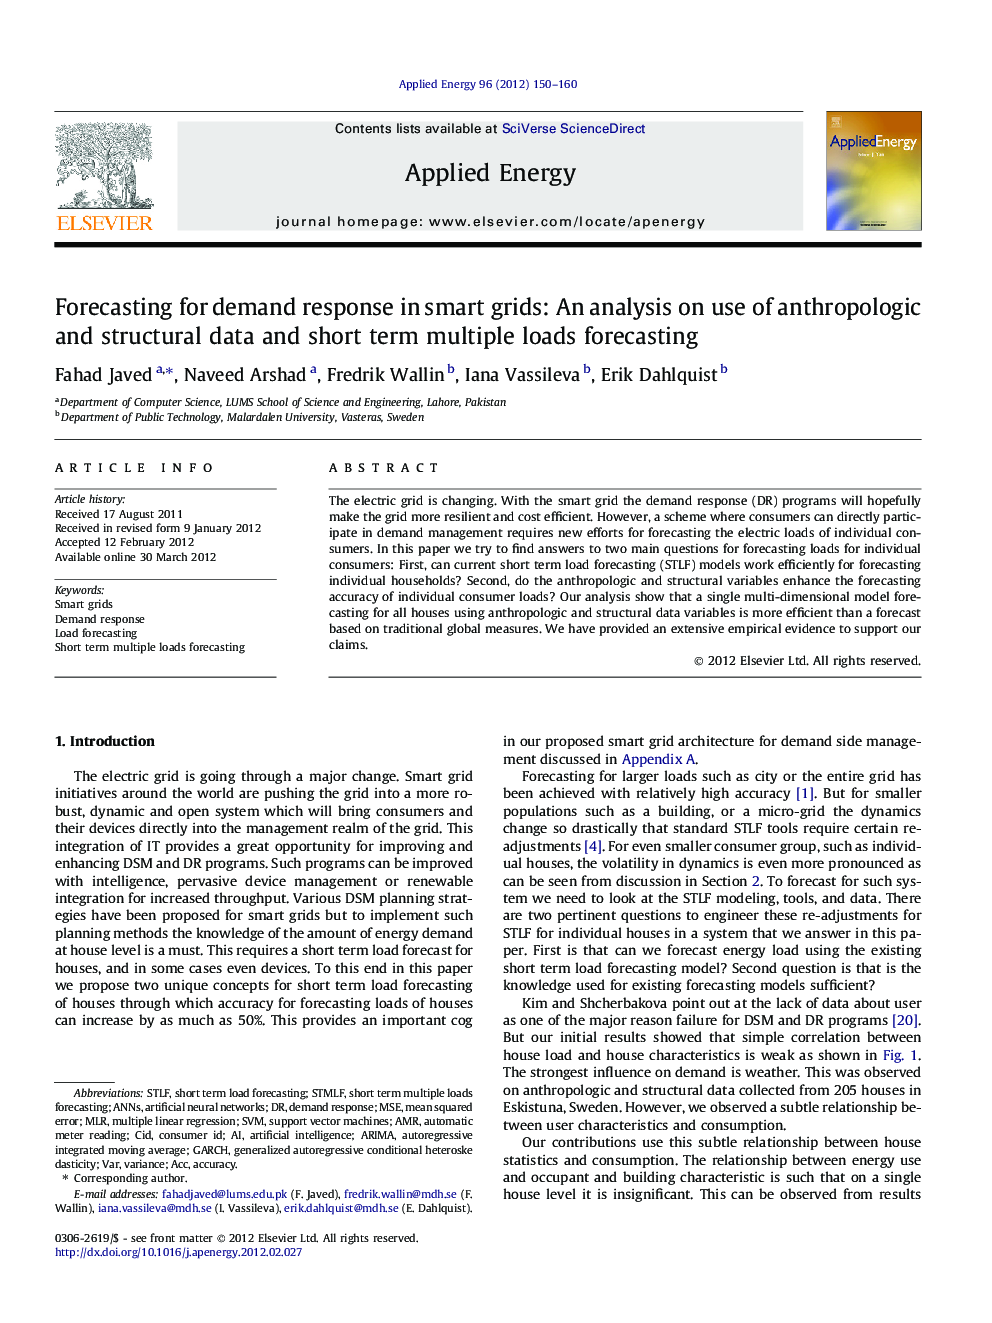 Forecasting for demand response in smart grids: An analysis on use of anthropologic and structural data and short term multiple loads forecasting